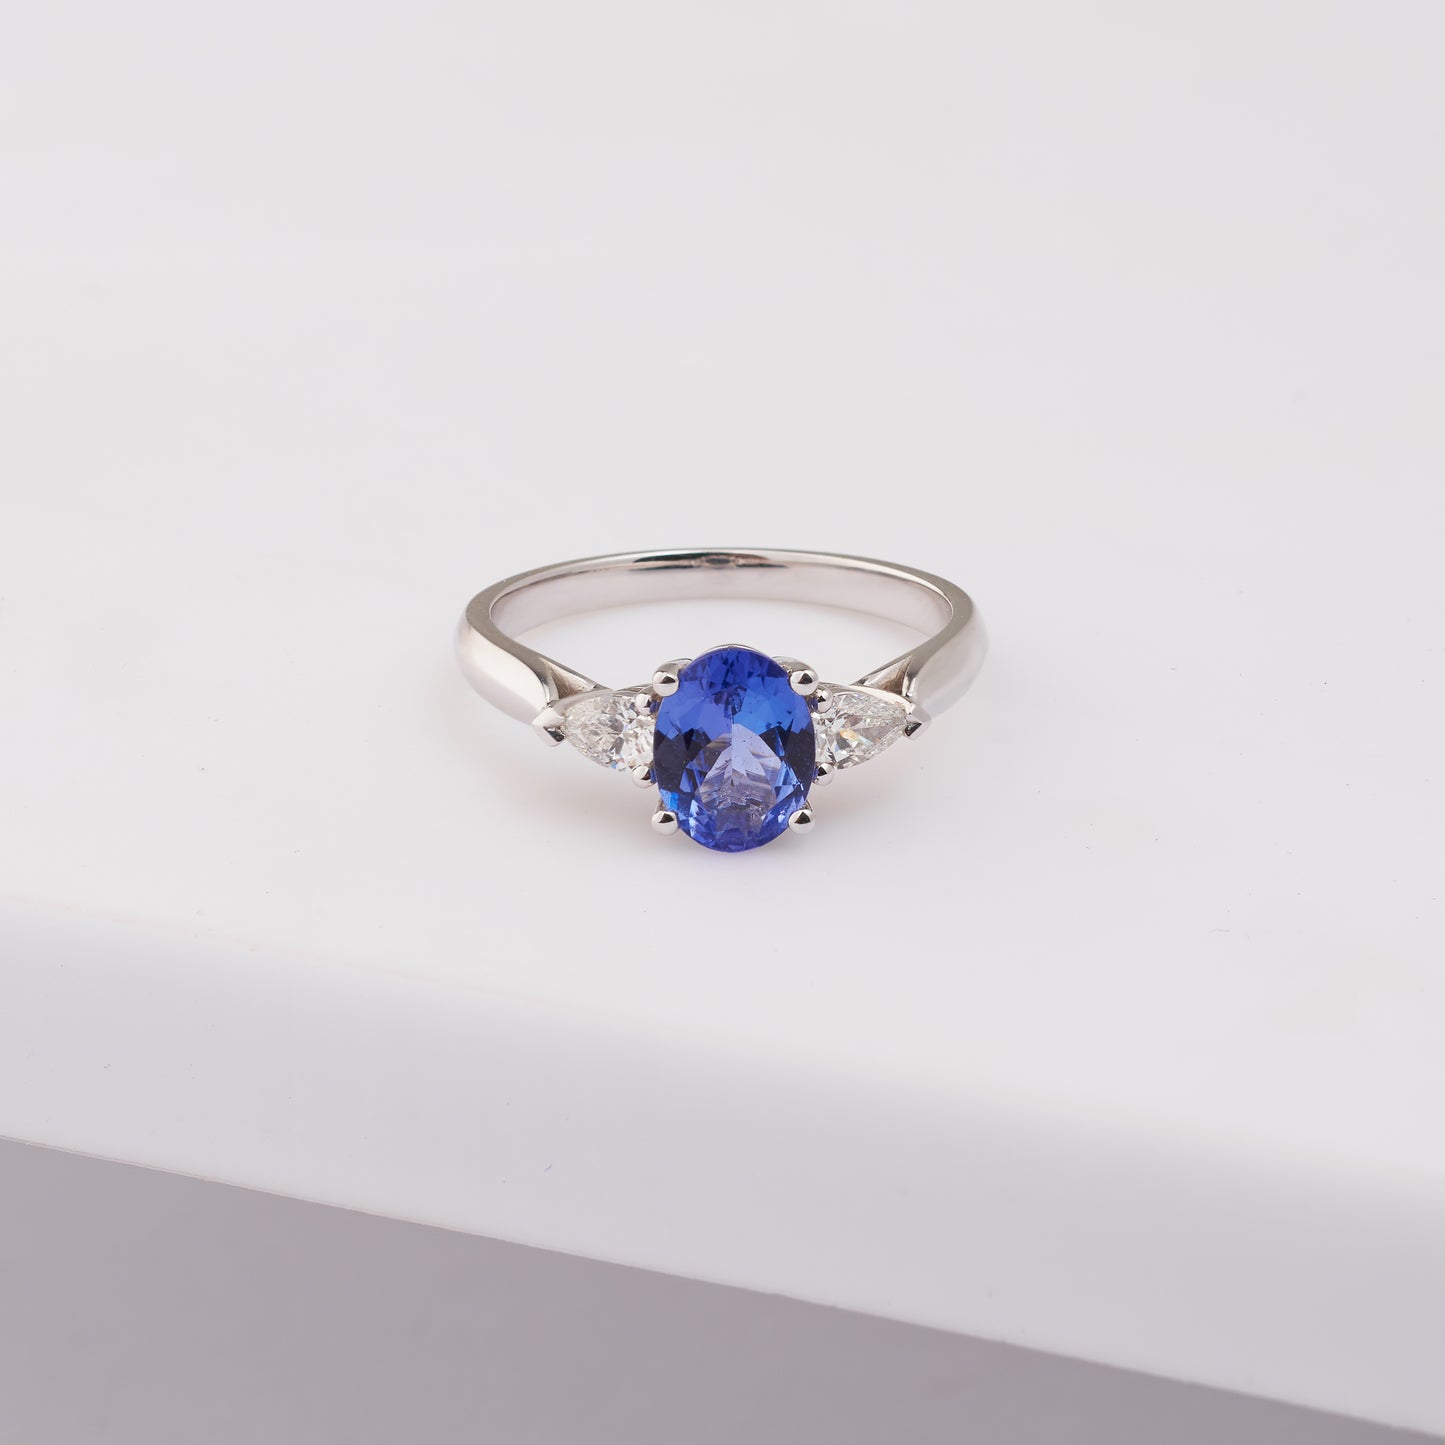 18K White Gold 8mm x 6mm Oval Tanzanite and Pear Diamond Ring.